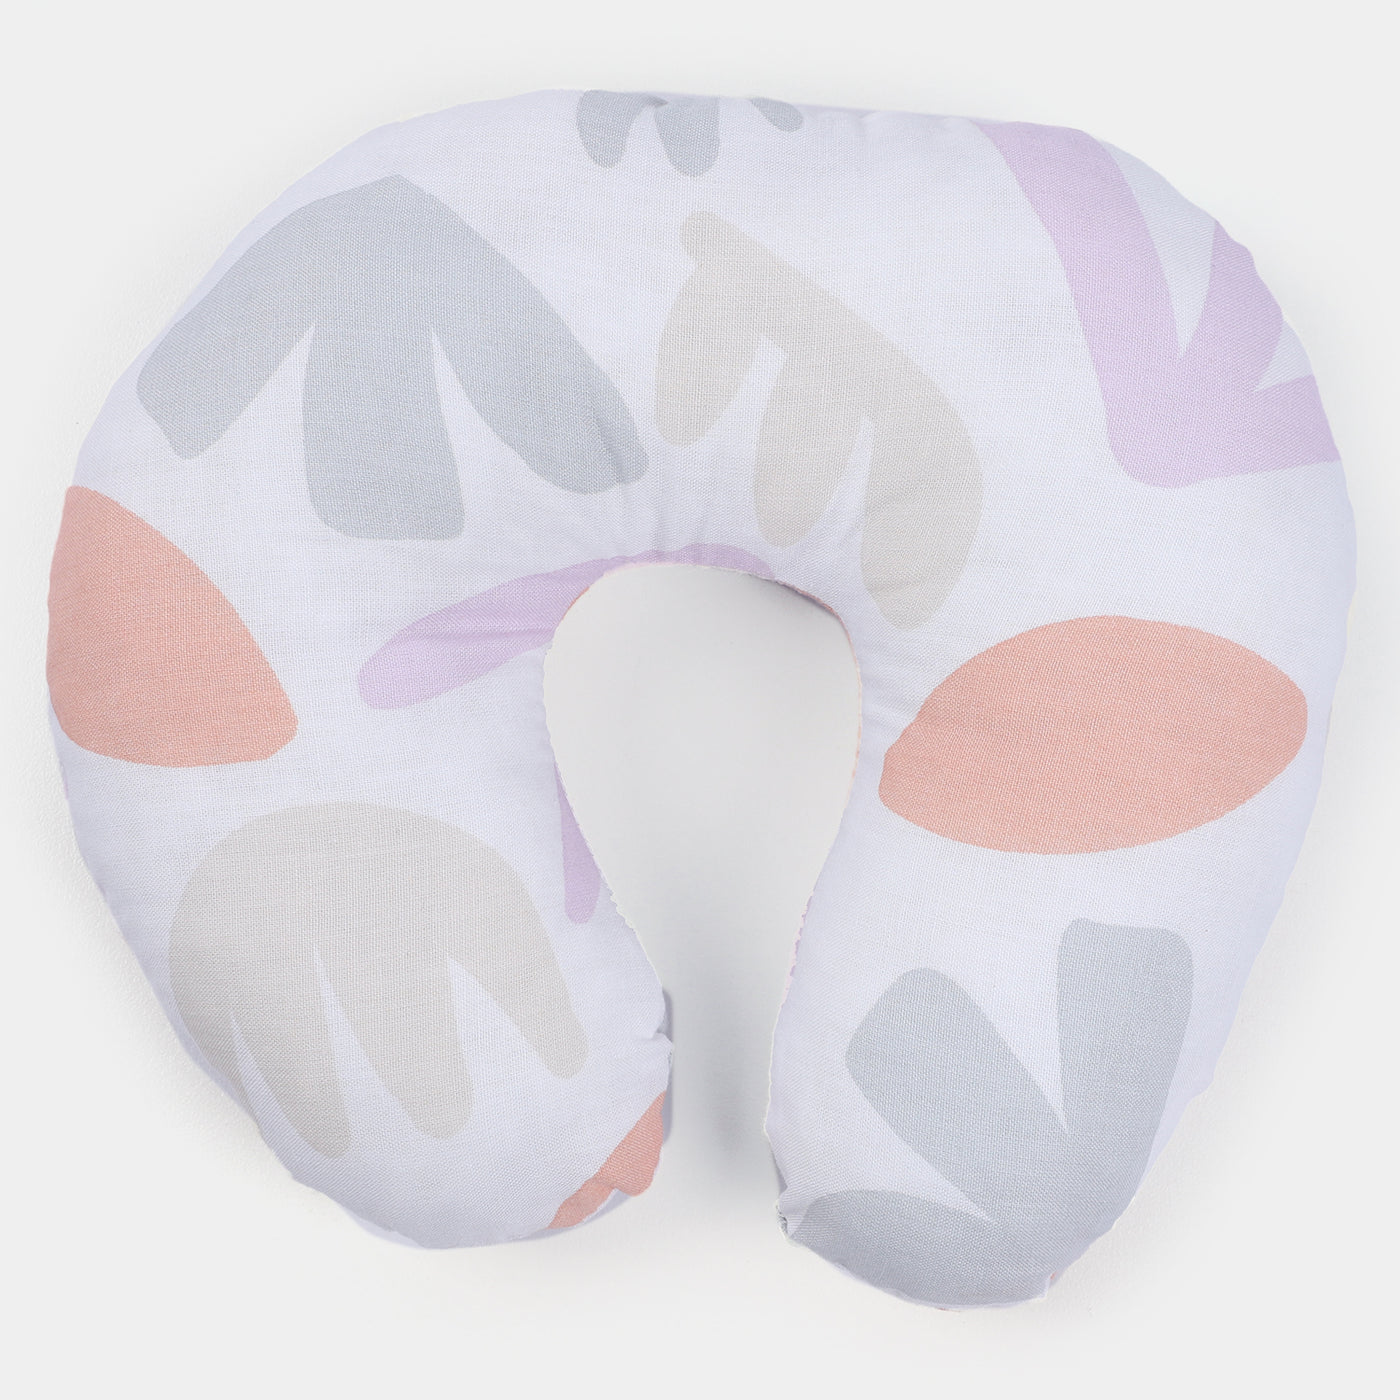 Baby Protection Soft Small Pillow